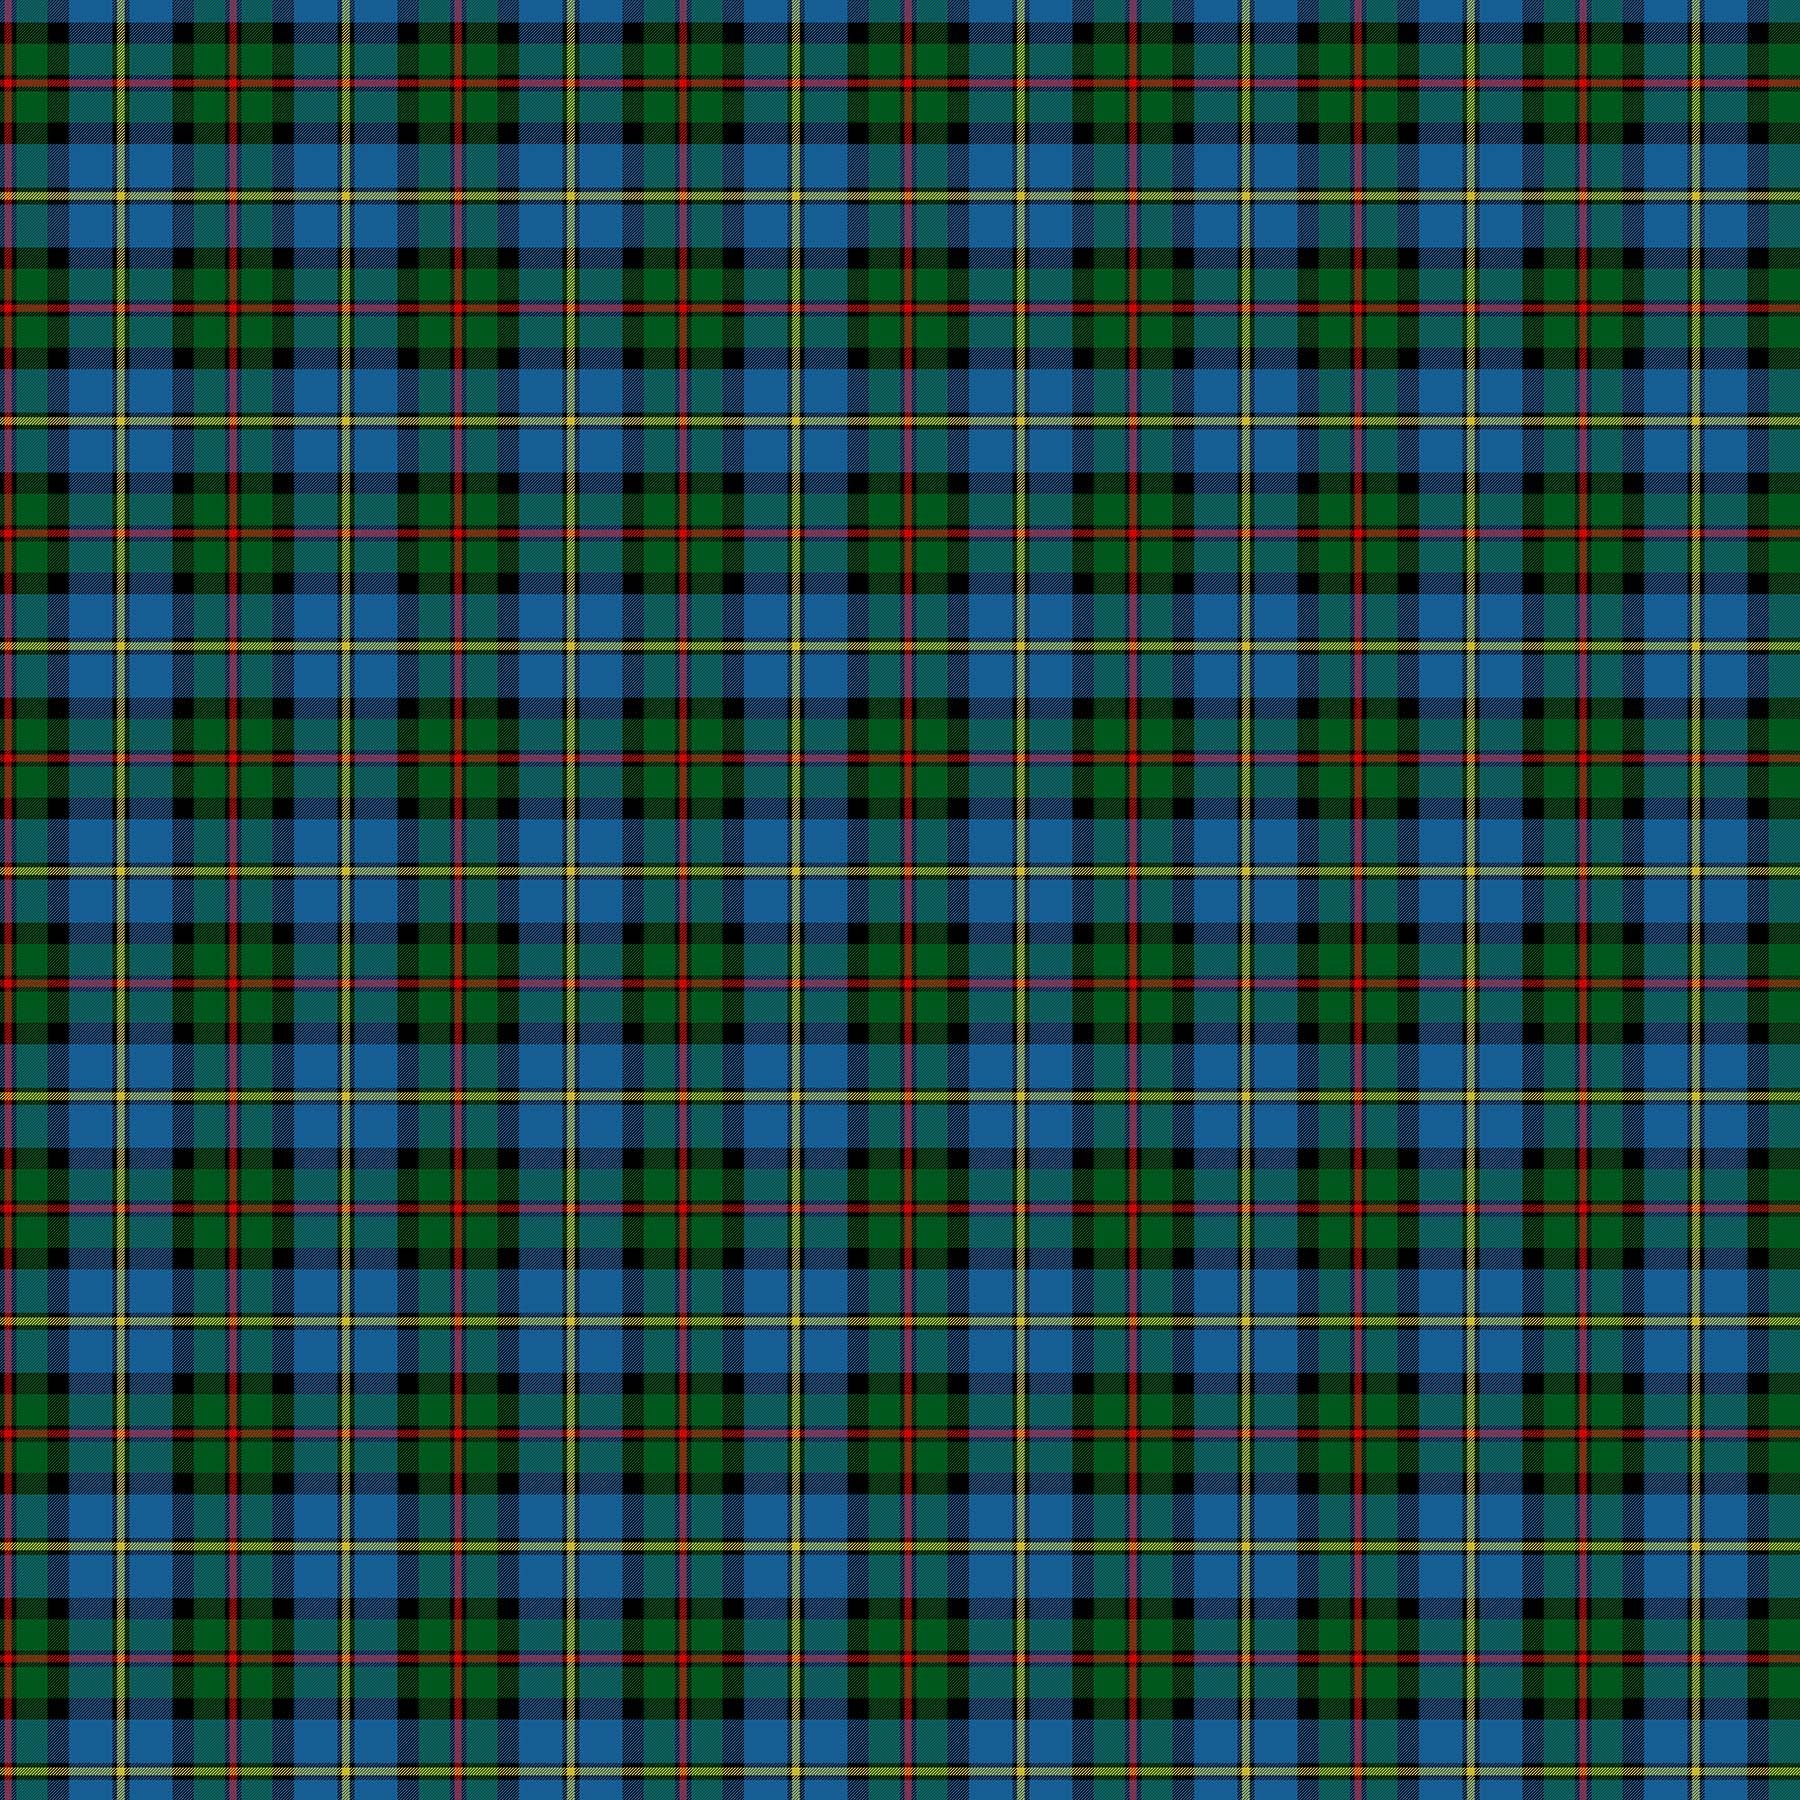 Totally Tartans Brushed Cotton Quilt Fabric - Mackenzie in Blue/Multi - W24506-44